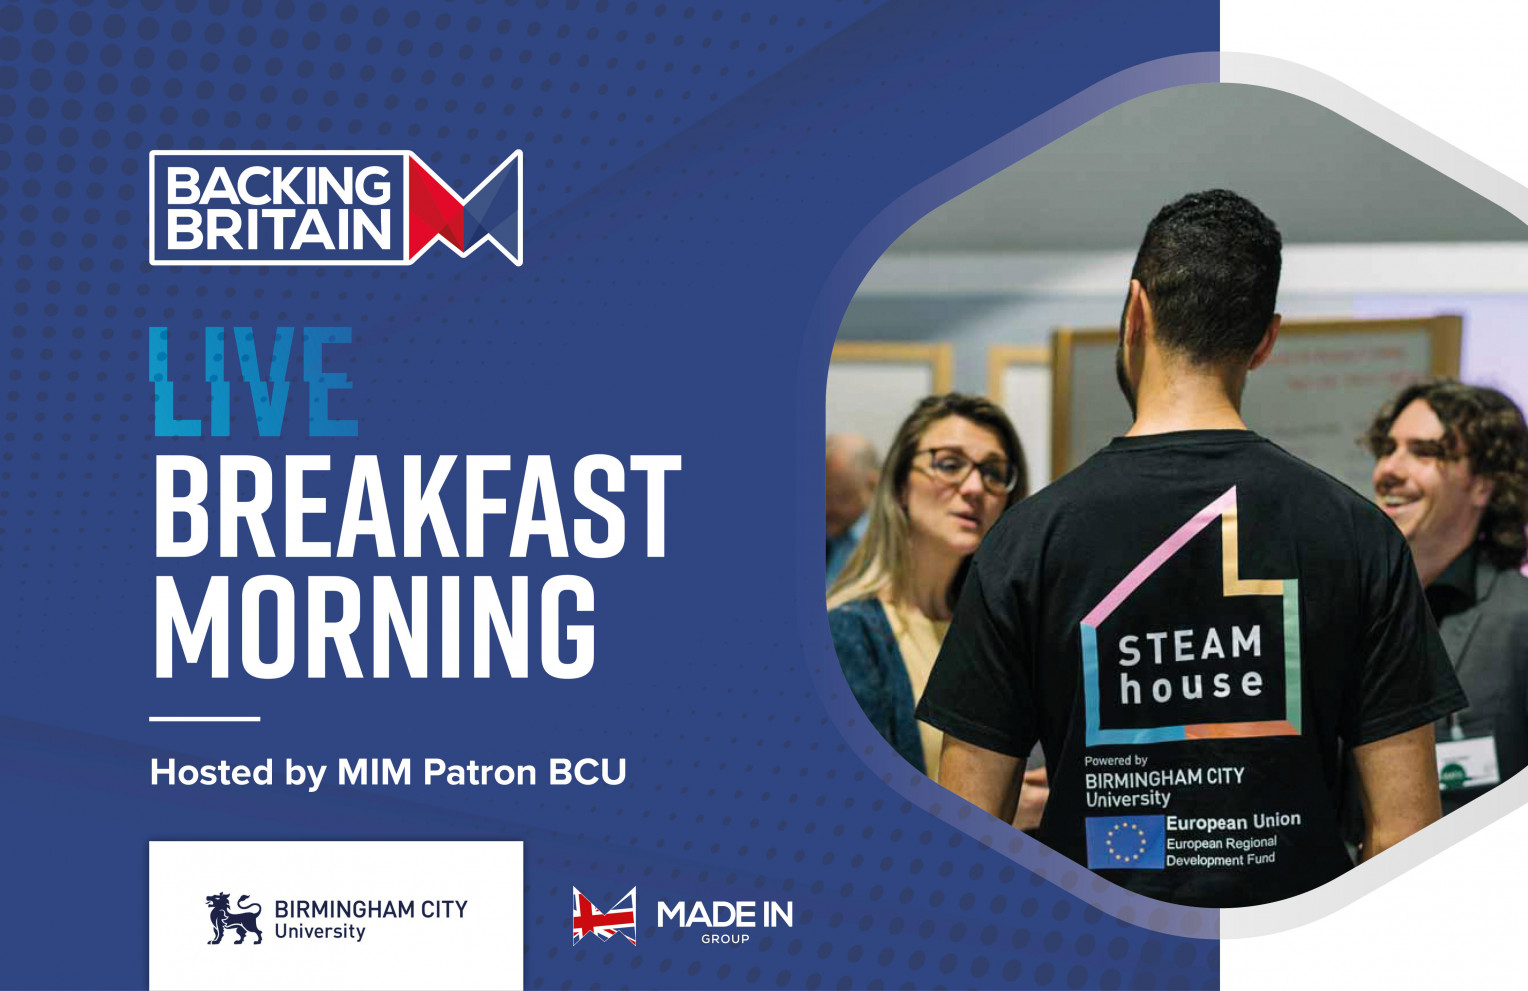 Backing Britain LIVE Breakfast Morning: Hosted by MIM Patron BCU